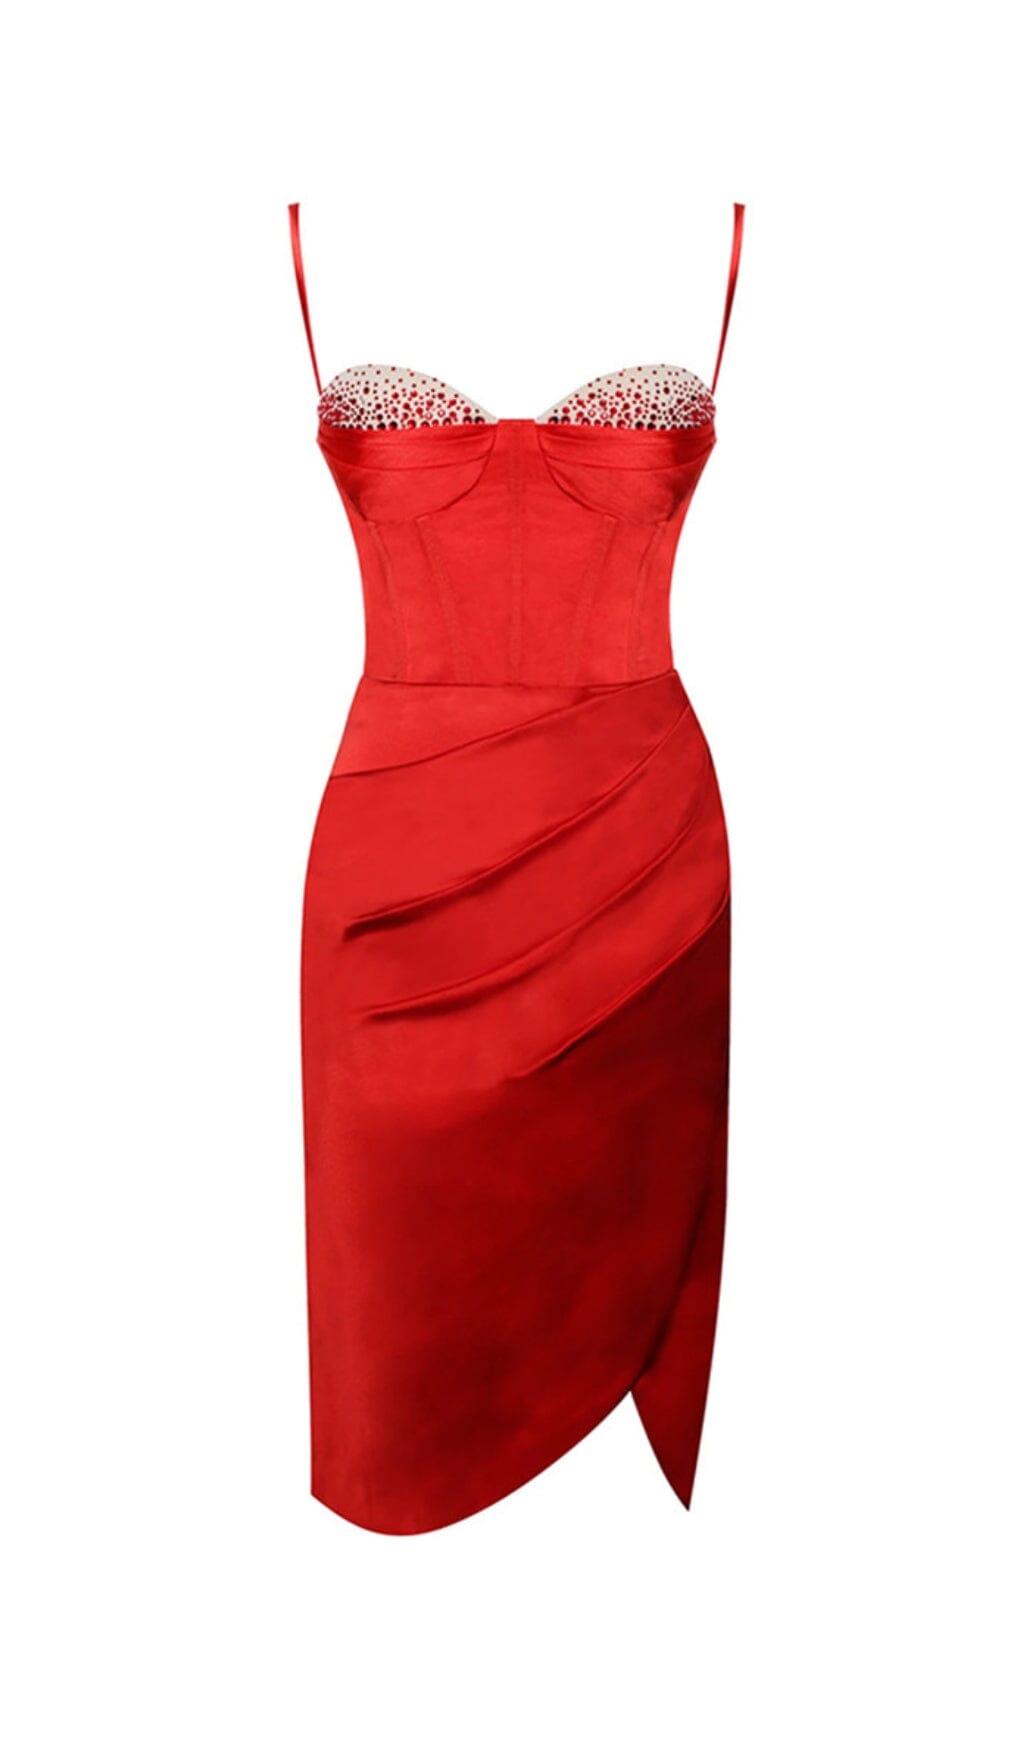 NYLA RED SATIN CORSET DRESS WITH CRYSTALS - Ownci